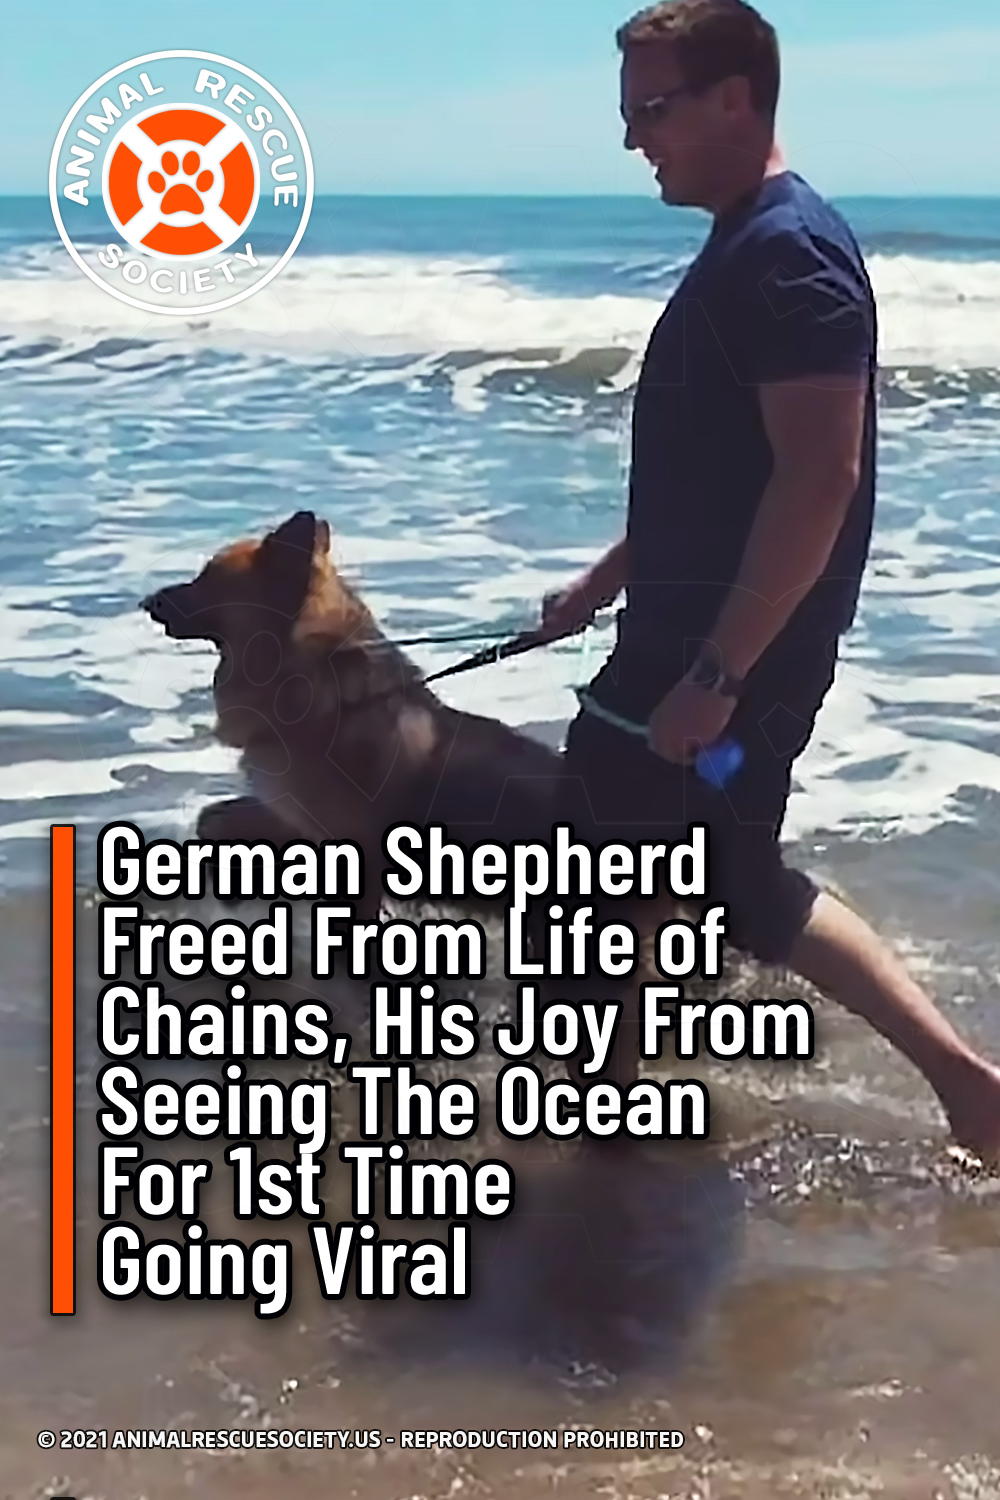 German Shepherd Freed From Life of Chains, His Joy From Seeing The Ocean For 1st Time Going Viral